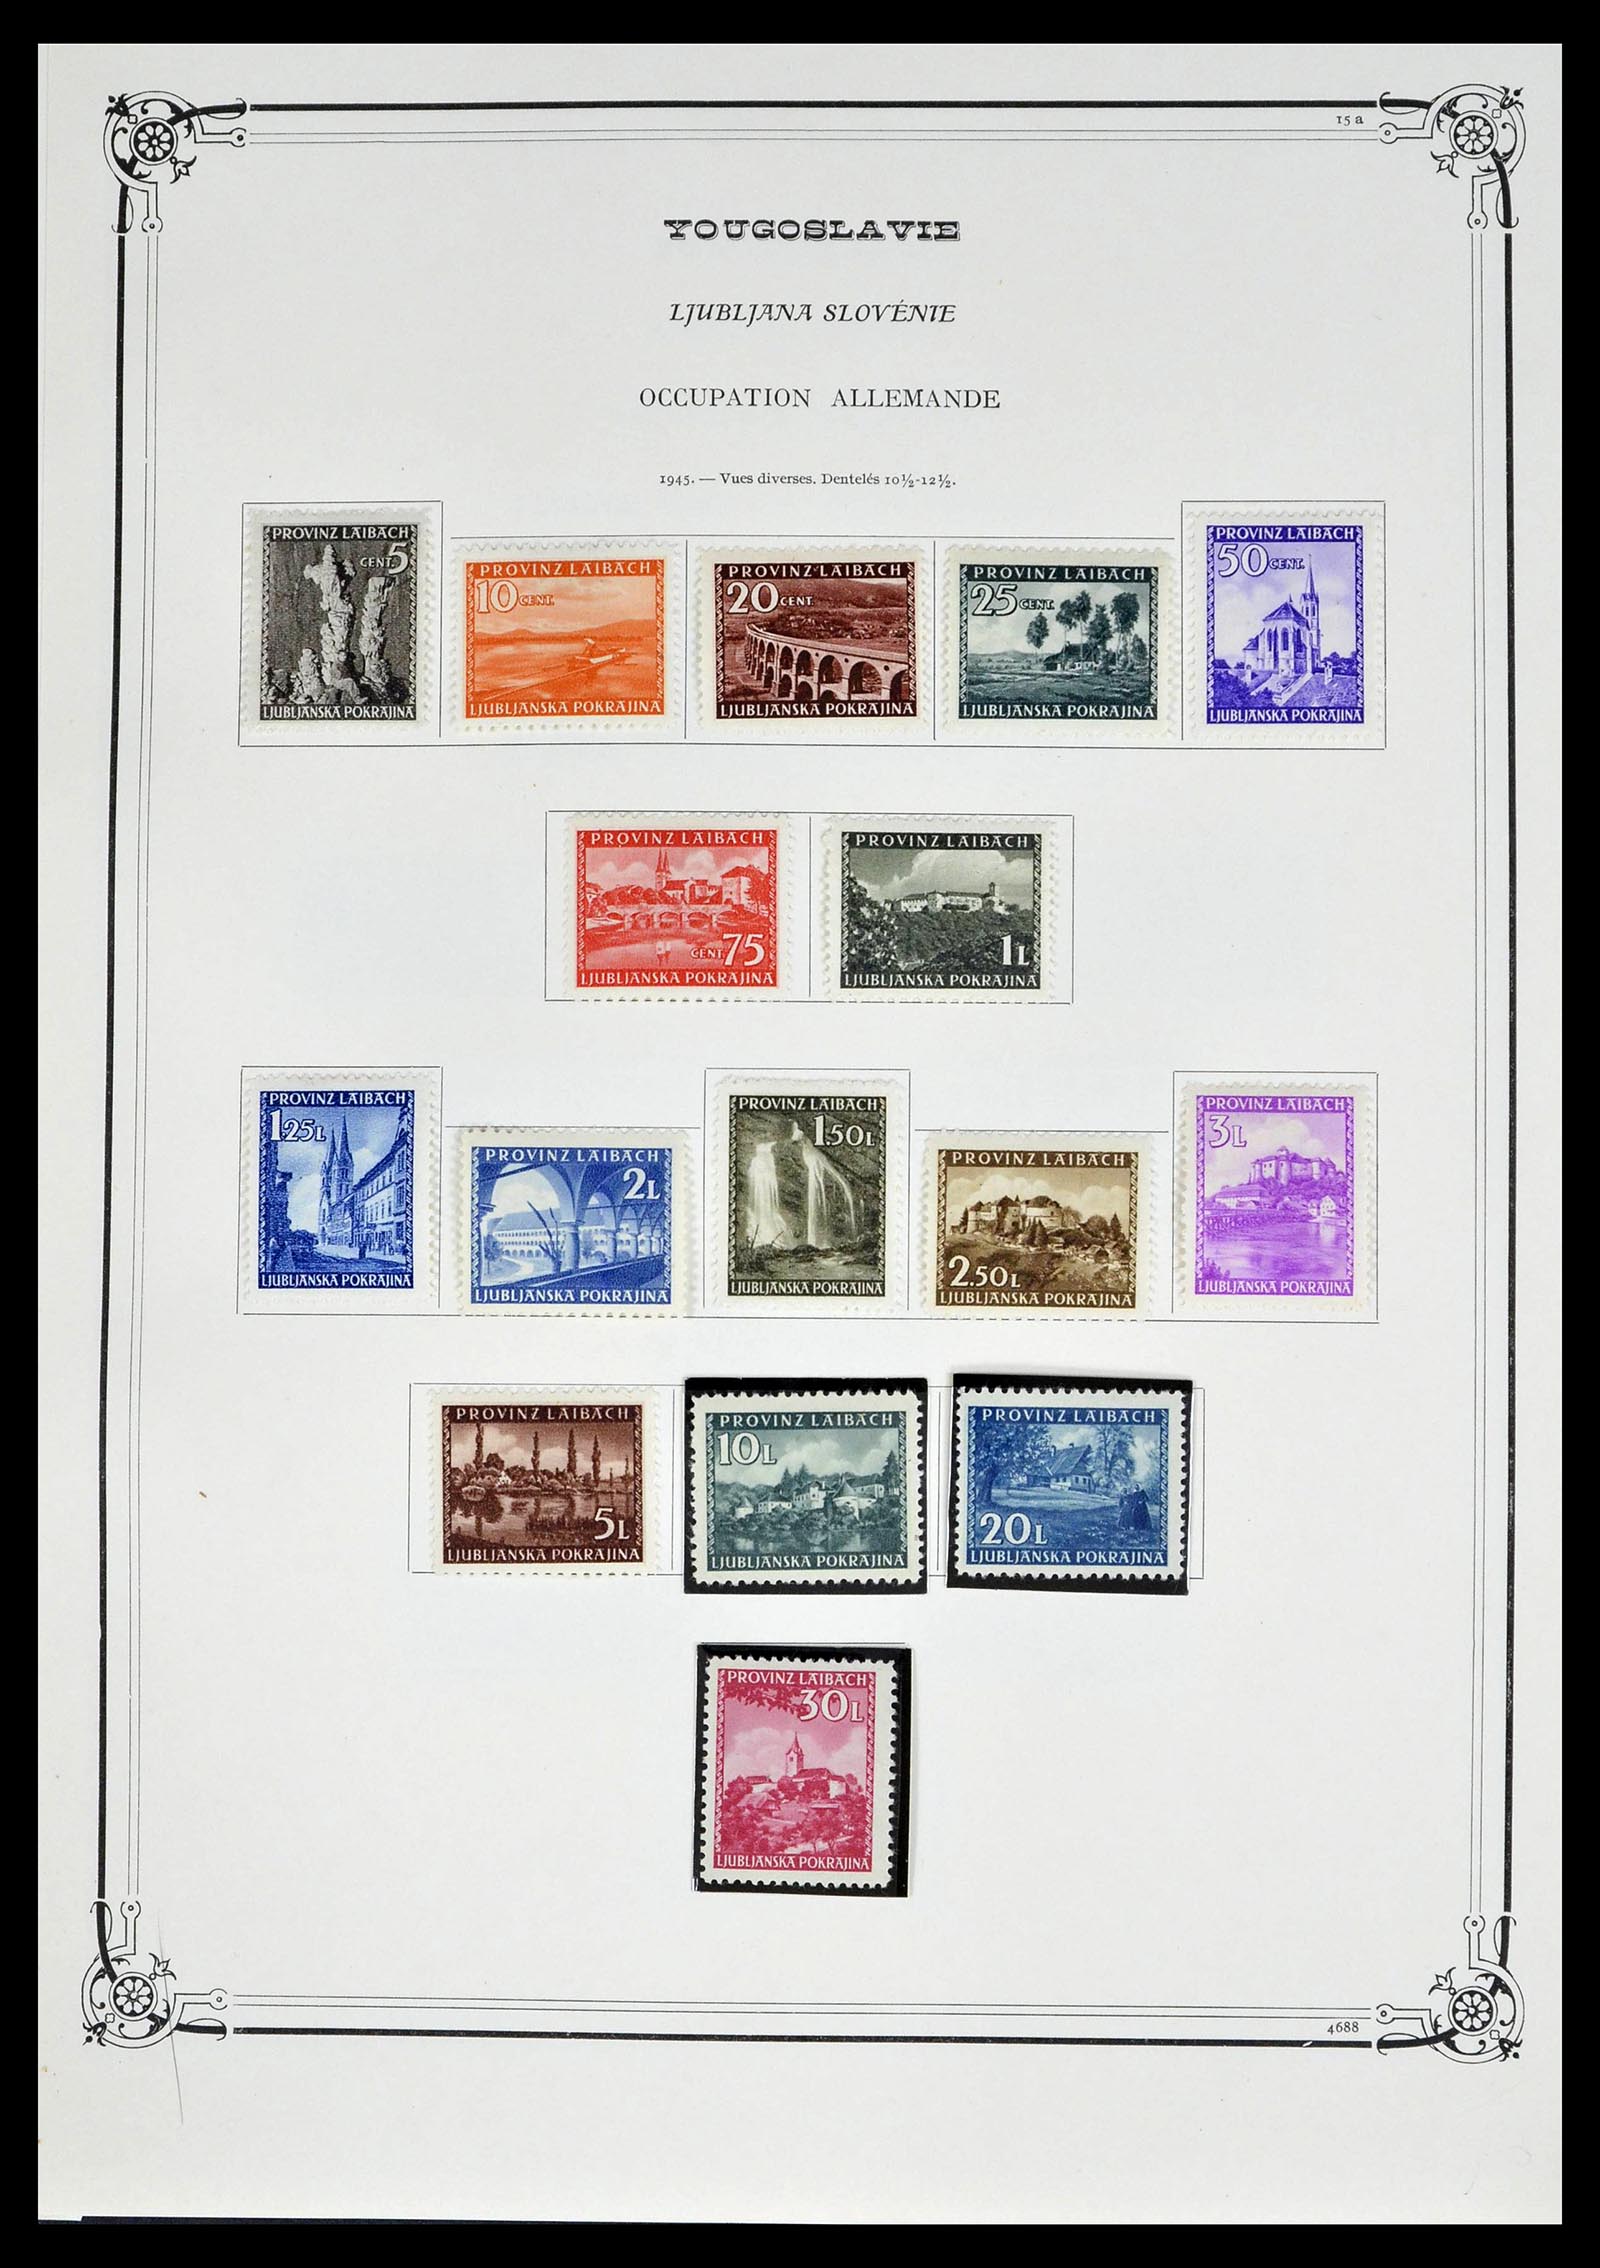 39290 0005 - Stamp collection 39290 Italian and German occupation of Lubljana 1941-19